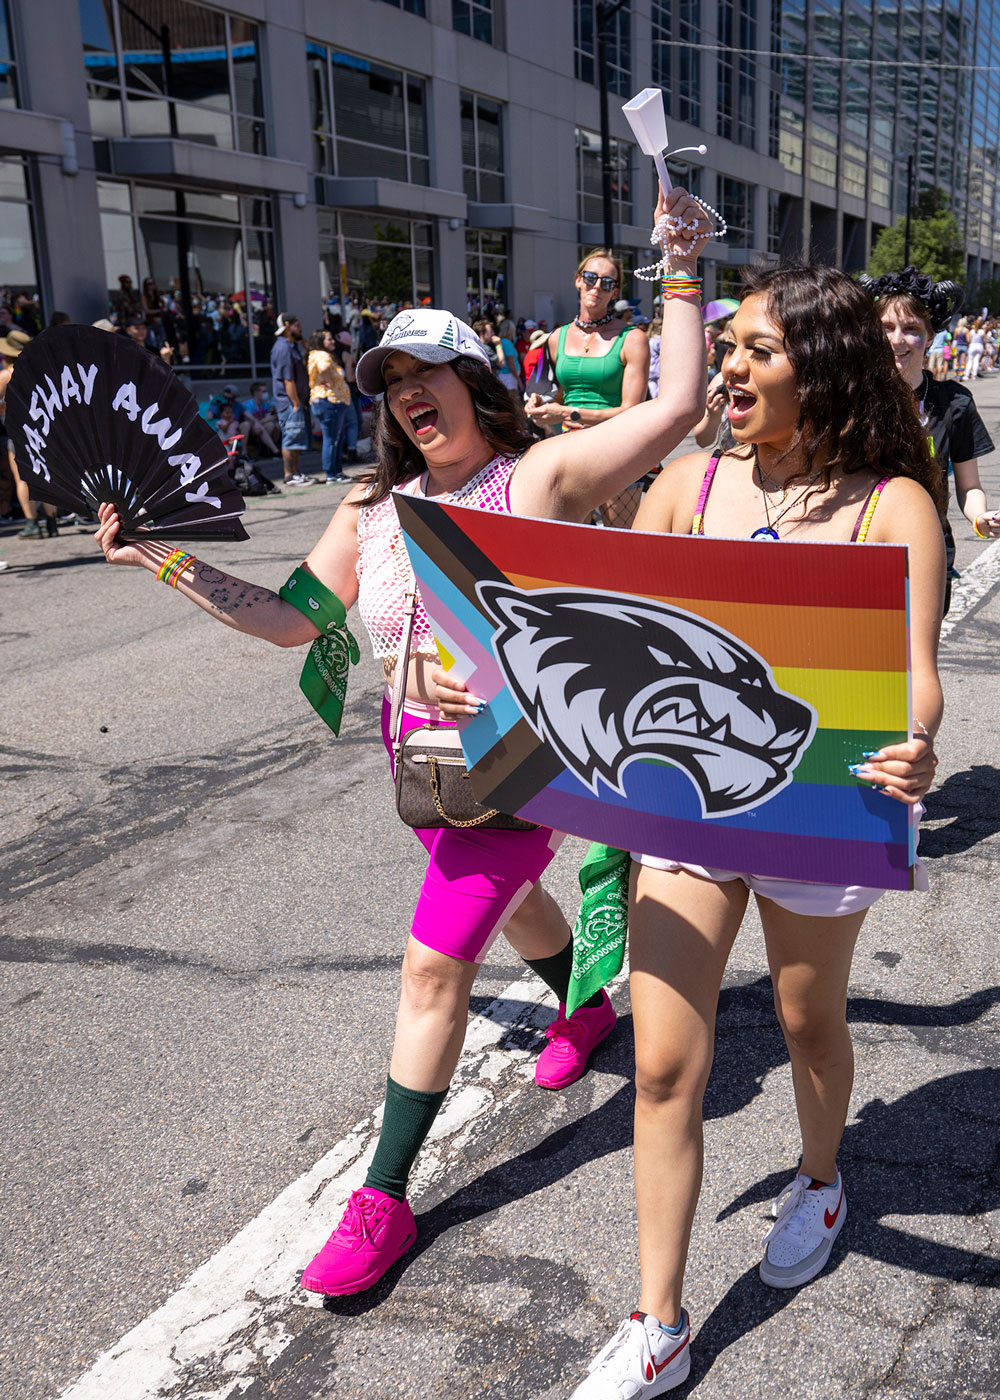 UVU staff and students in the Pride Parade